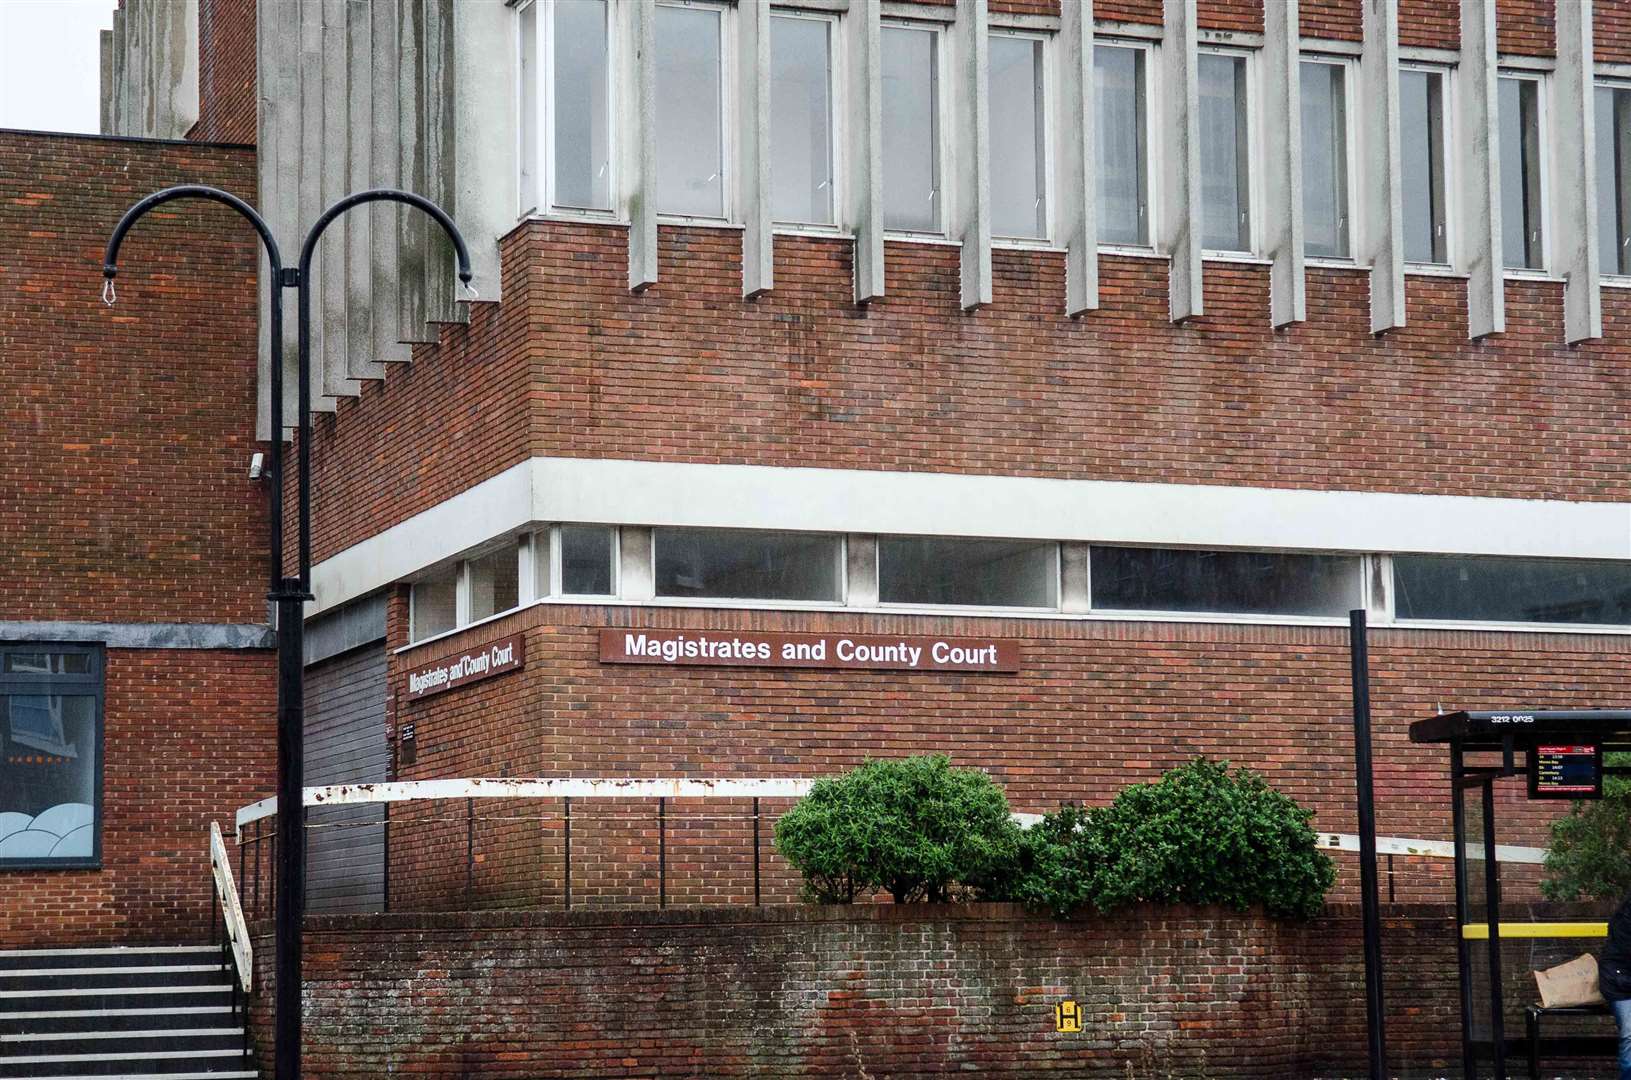 Pike admitted drink-driving when he appeared at Margate Magistrates Court